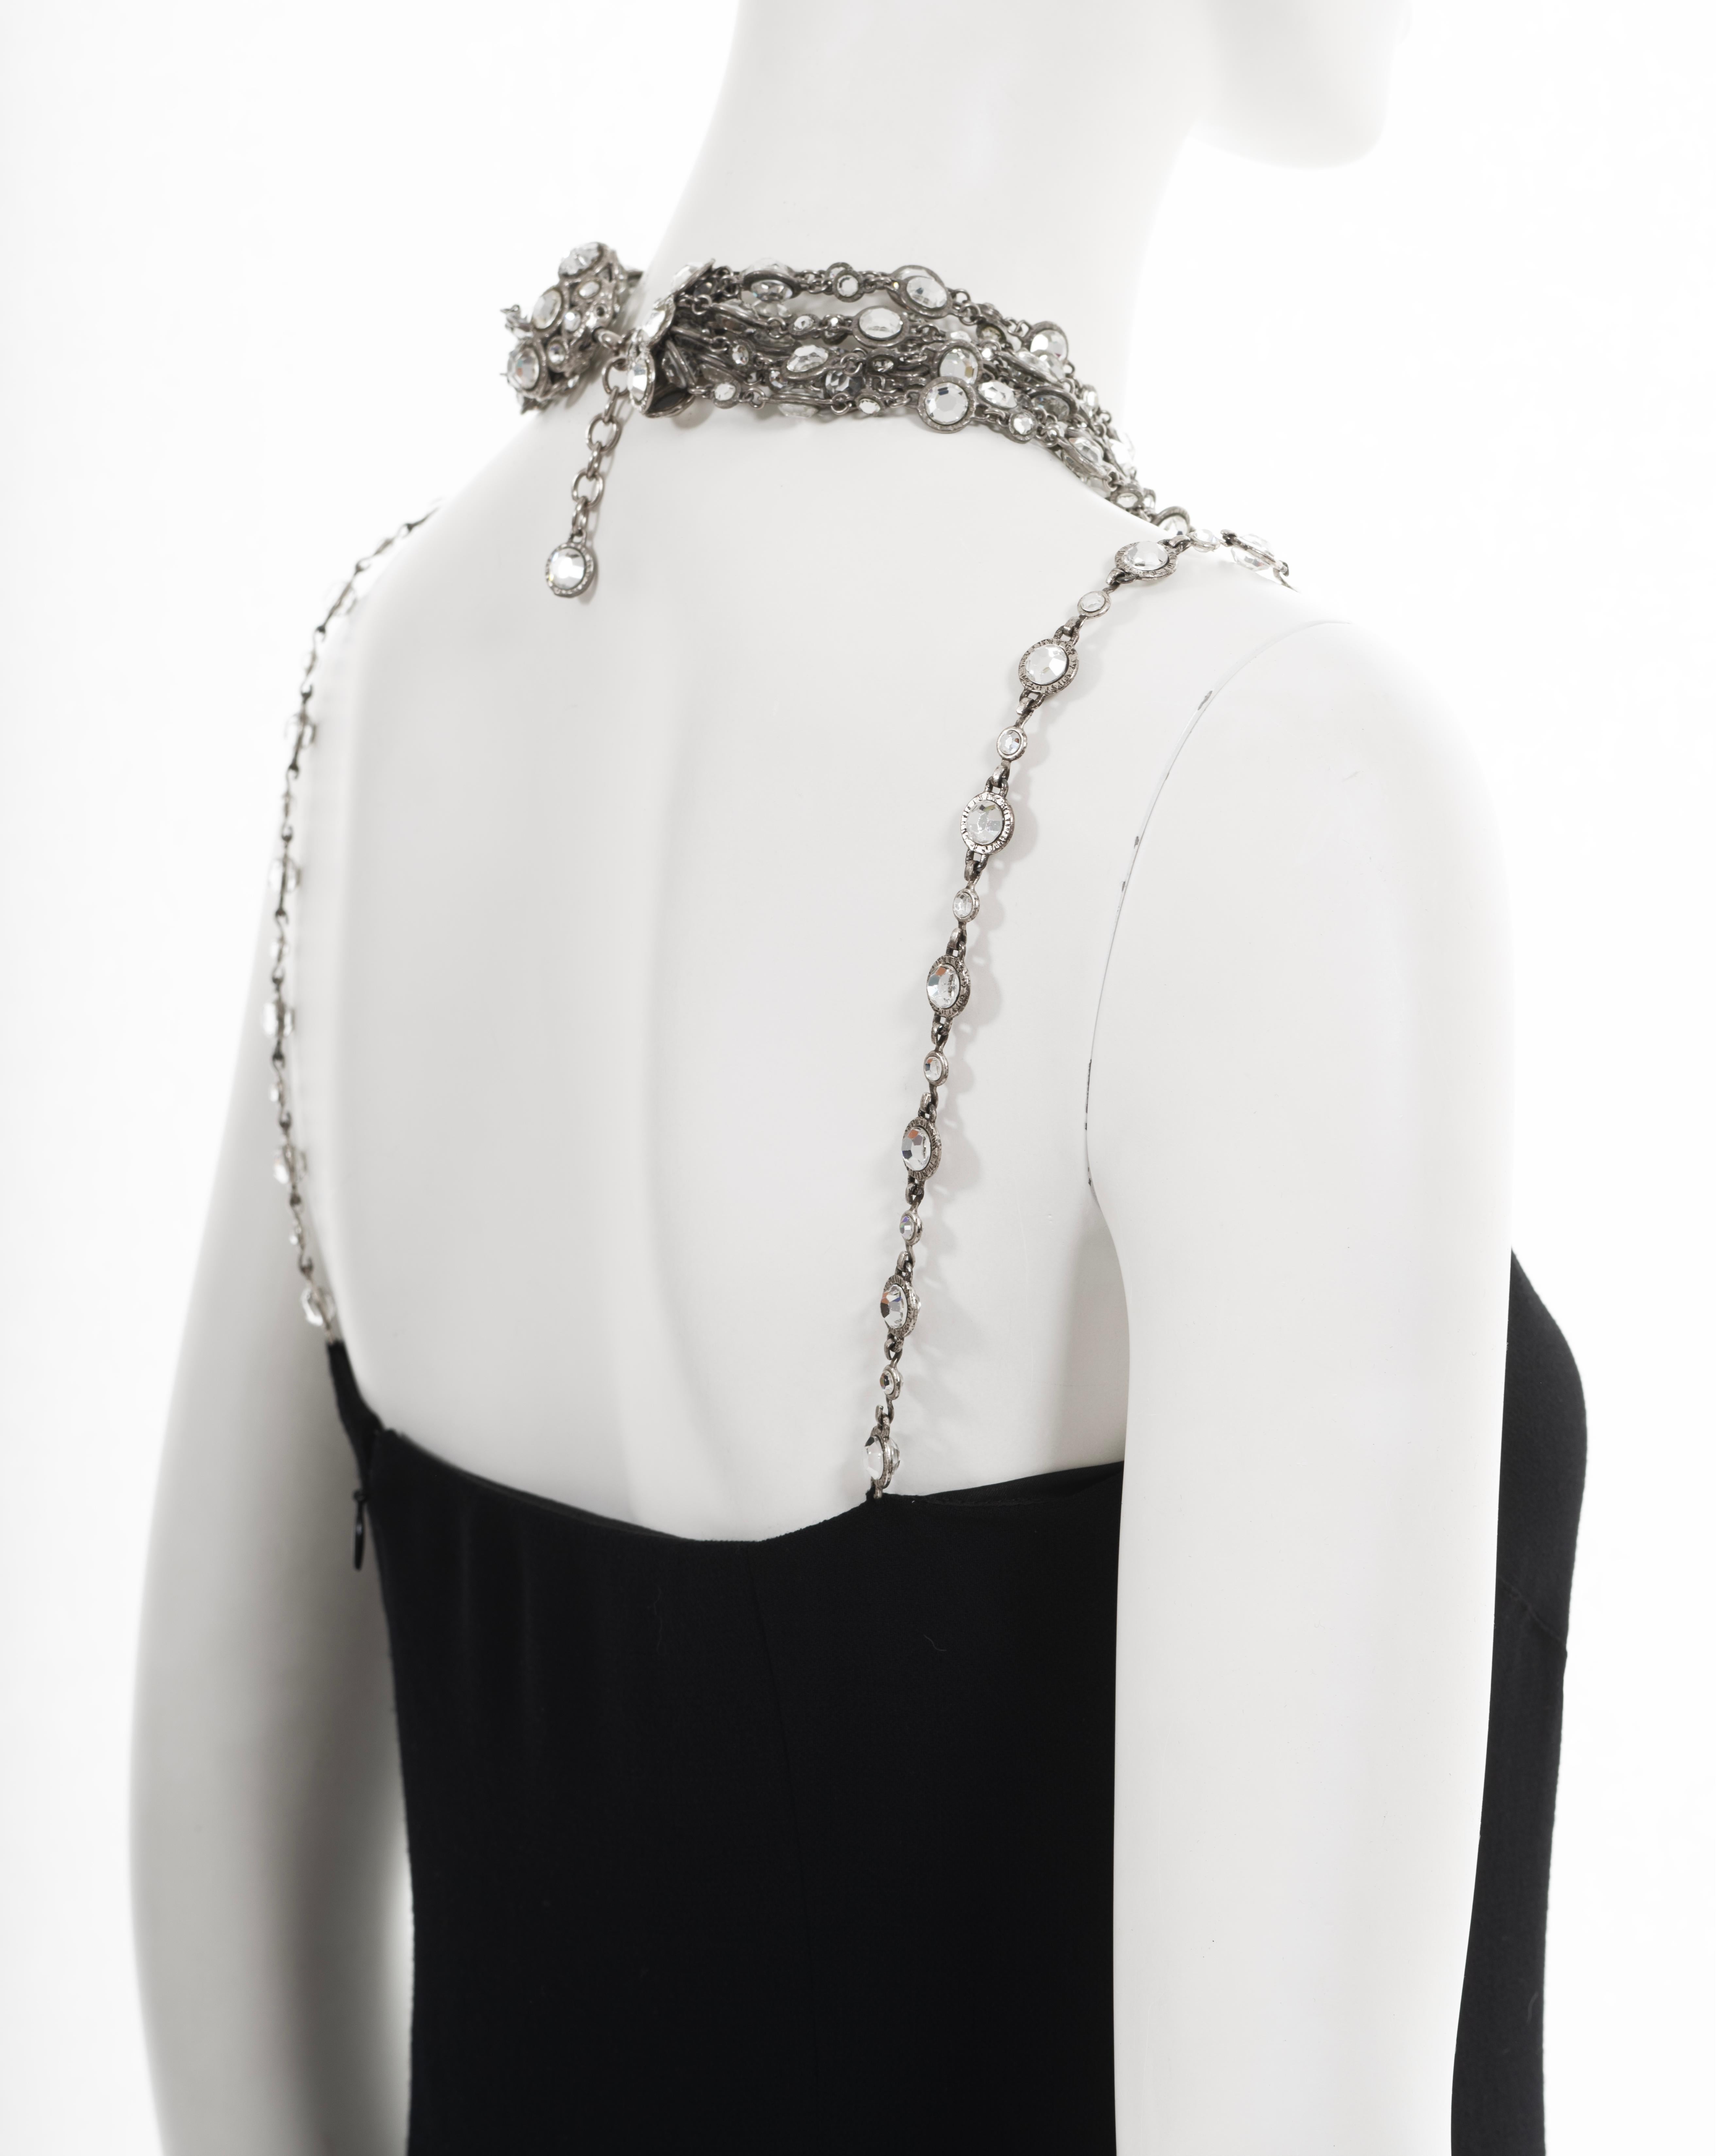 Chanel by Karl Lagerfeld black evening dress with crystal jewellery set, ss 1998 For Sale 9